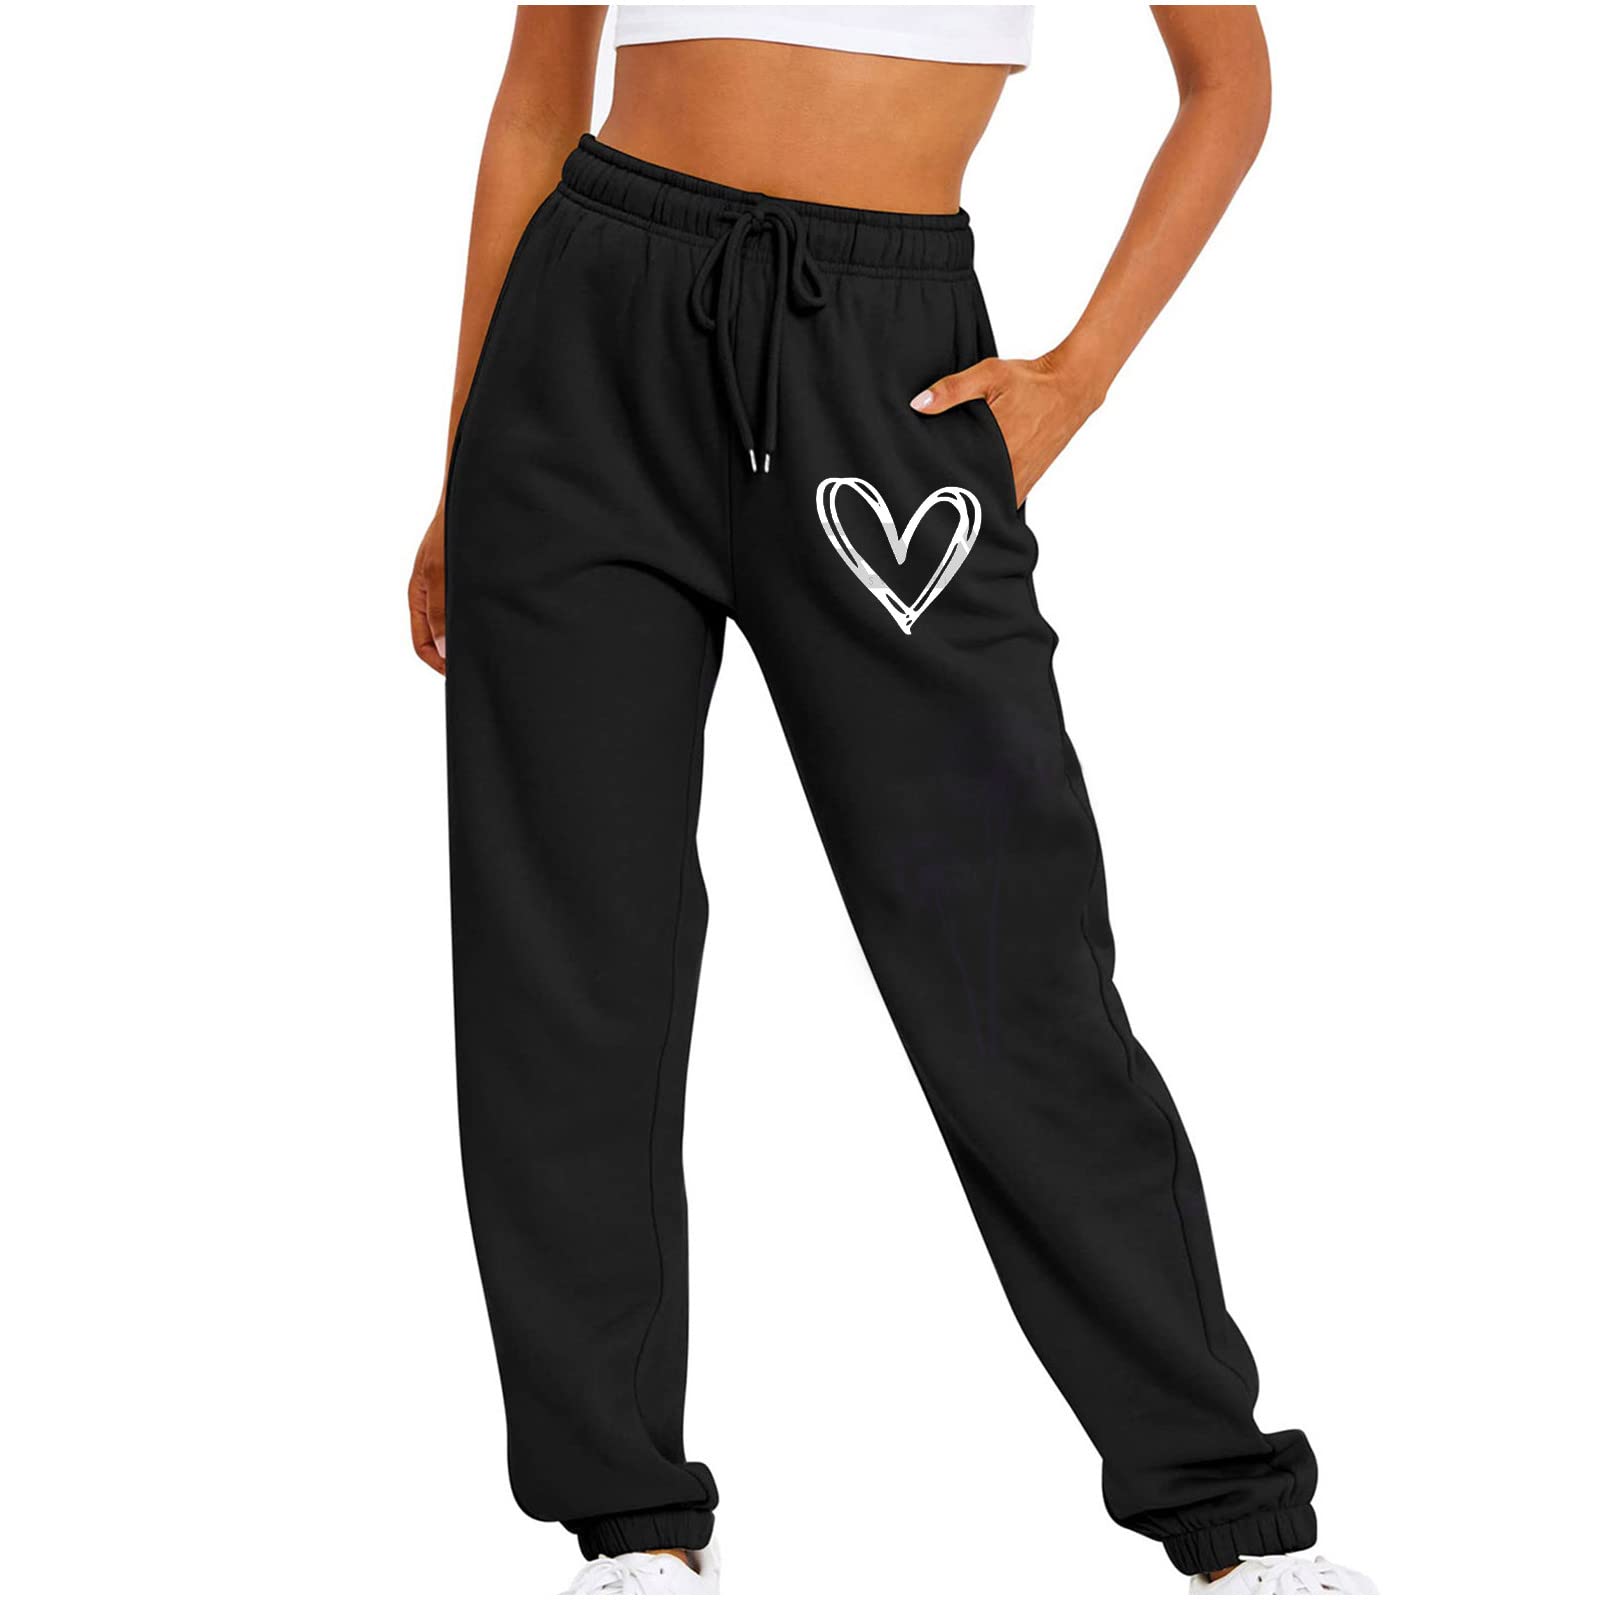 Women's Joggers Pants with Flap Pockets Elastic Waist Athletic